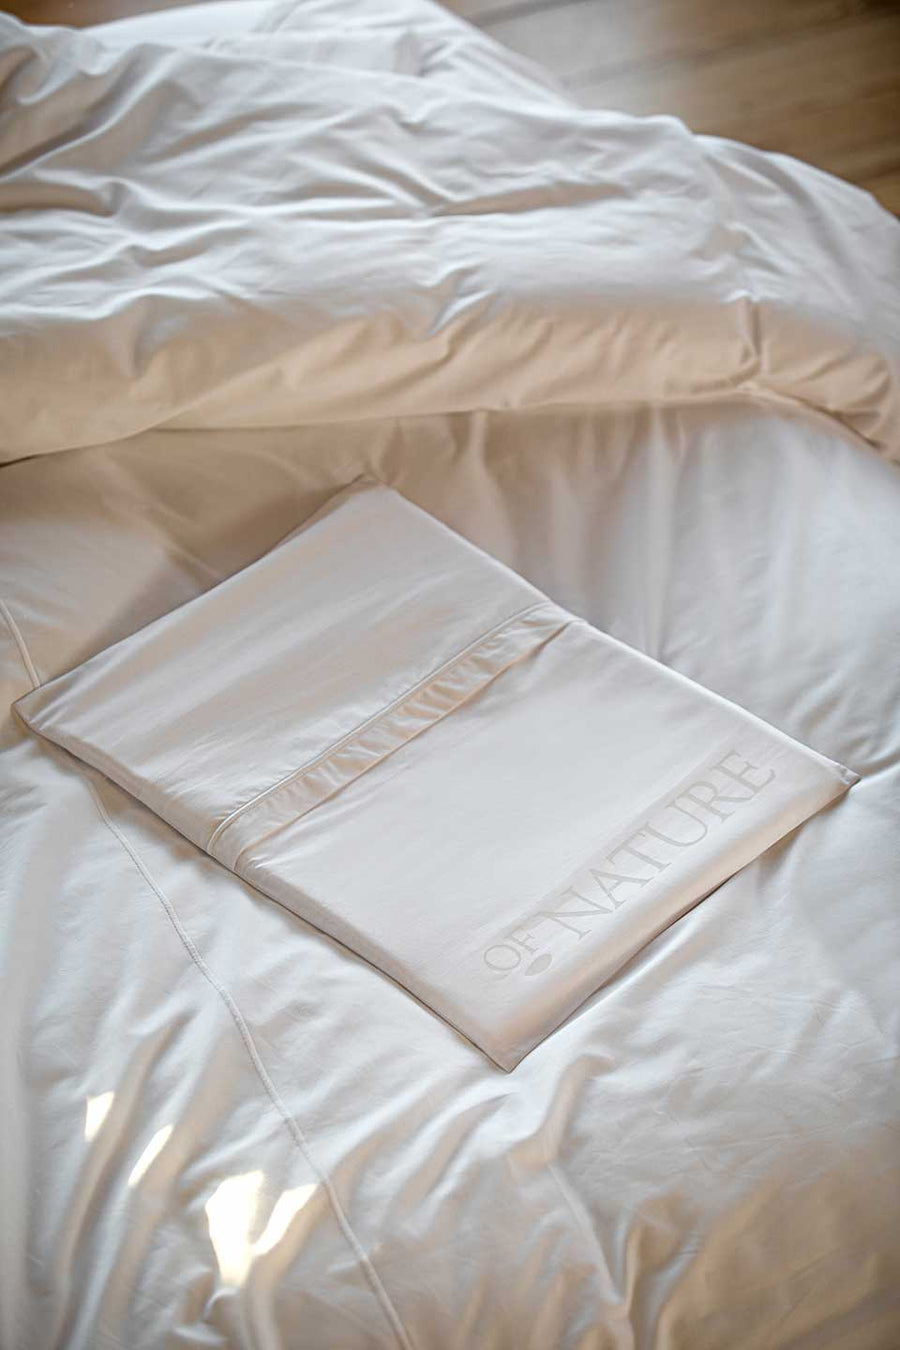 Gray eco-friendly packaging in Egyptian Cotton™ Percale from THON on top of a white duvet cover.